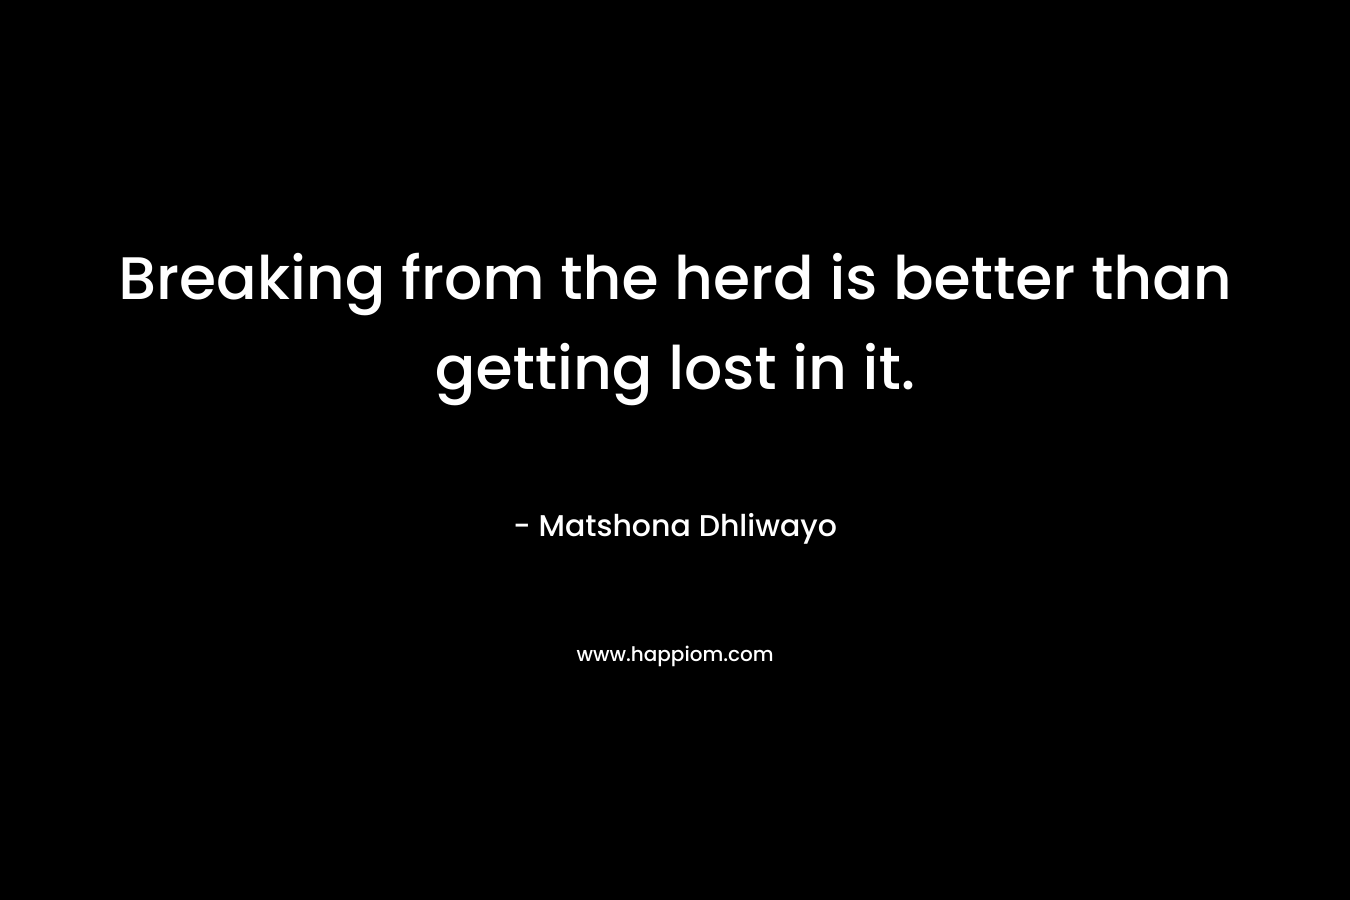 Breaking from the herd is better than getting lost in it. – Matshona Dhliwayo